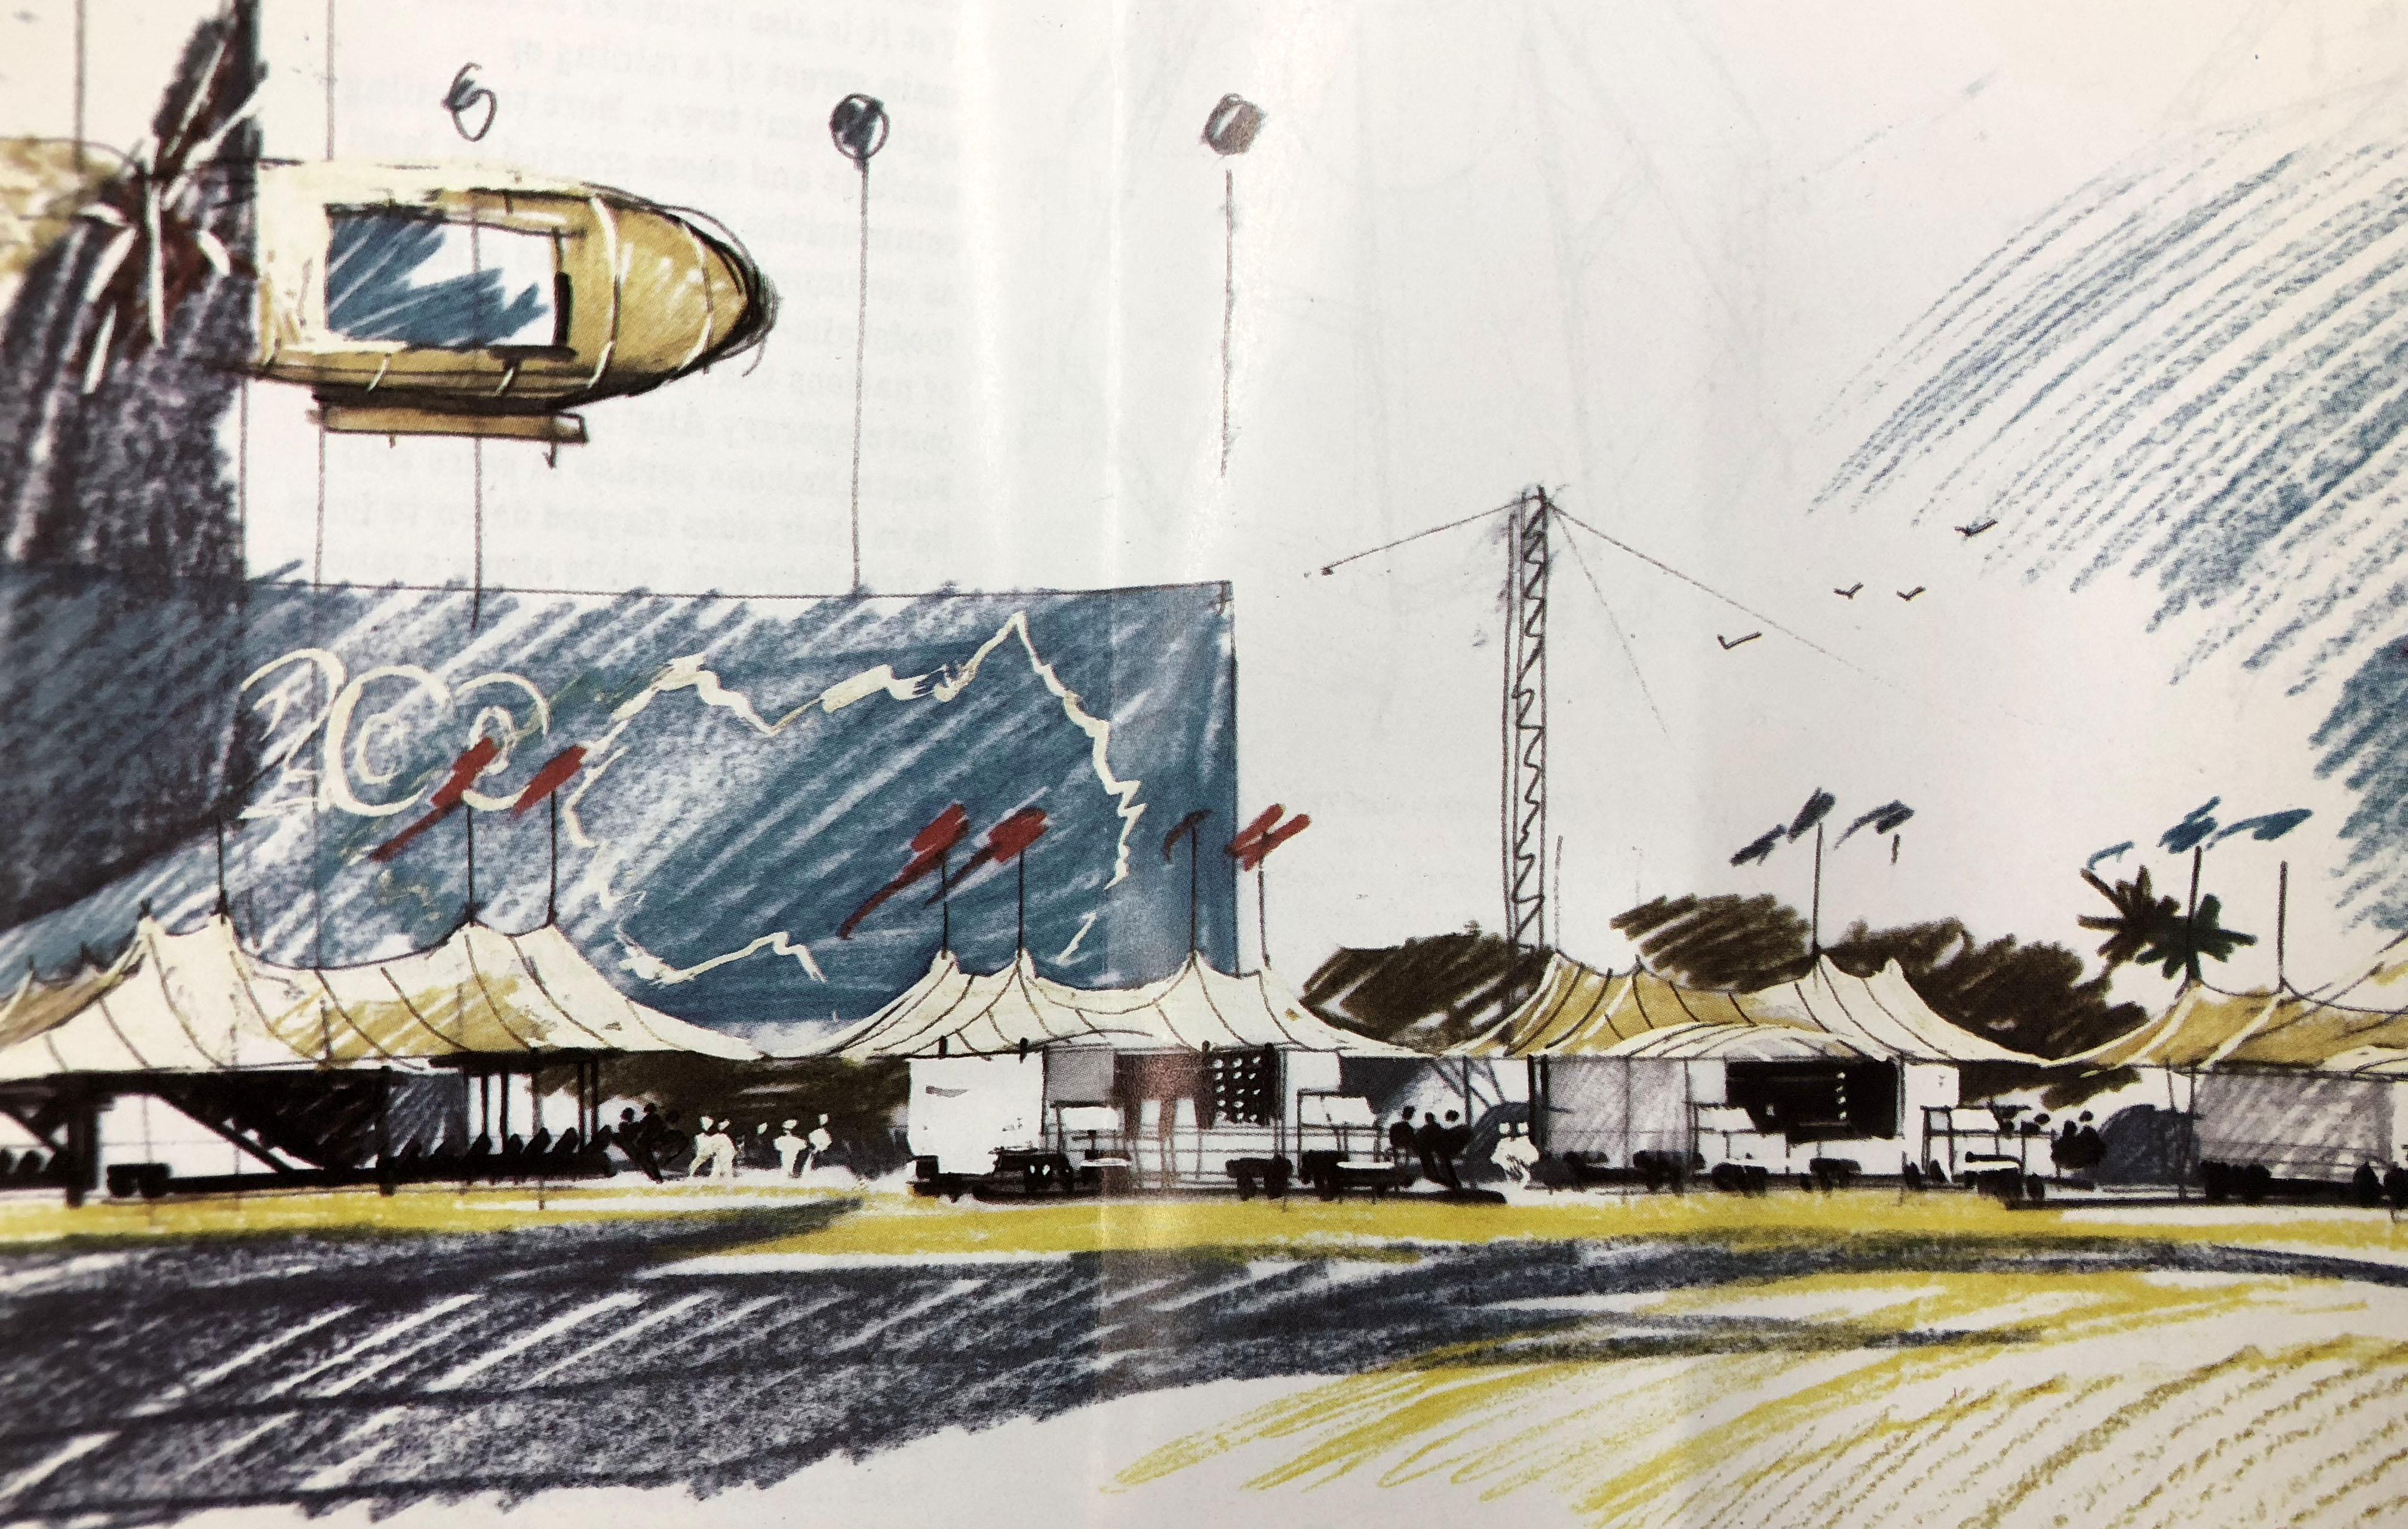 colour sketch drawing of what looks like a carnival